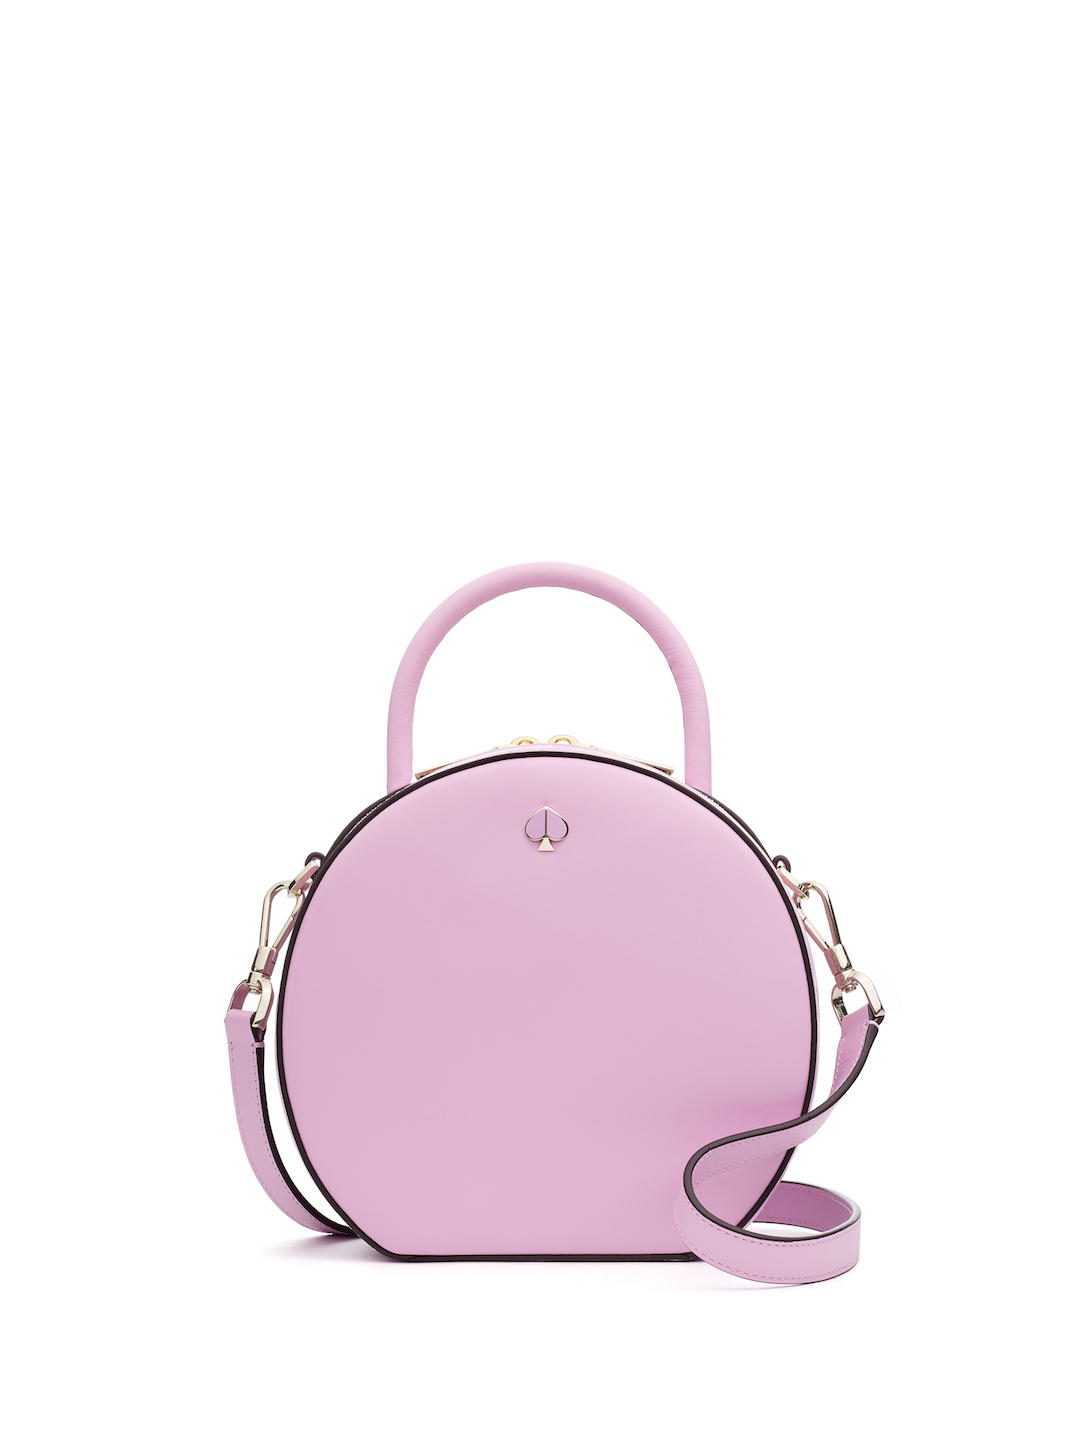 Kate Spade New York Summer 2019 Collection — SSI Life